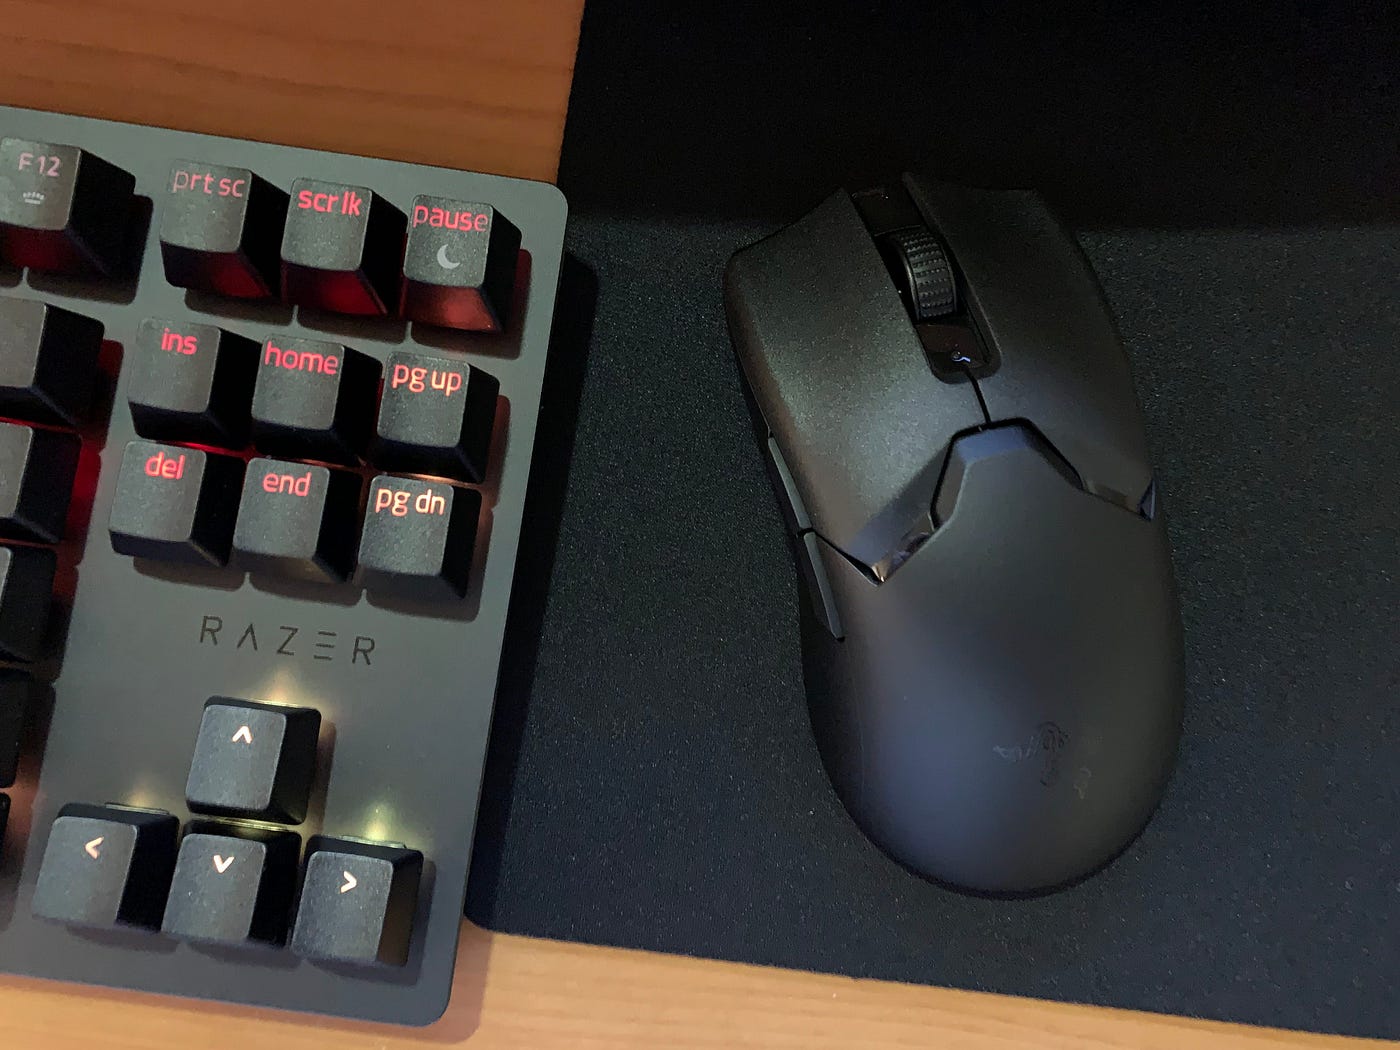 Viper V2 Pro review: Is Razer's light wireless mouse worth the $150 price?